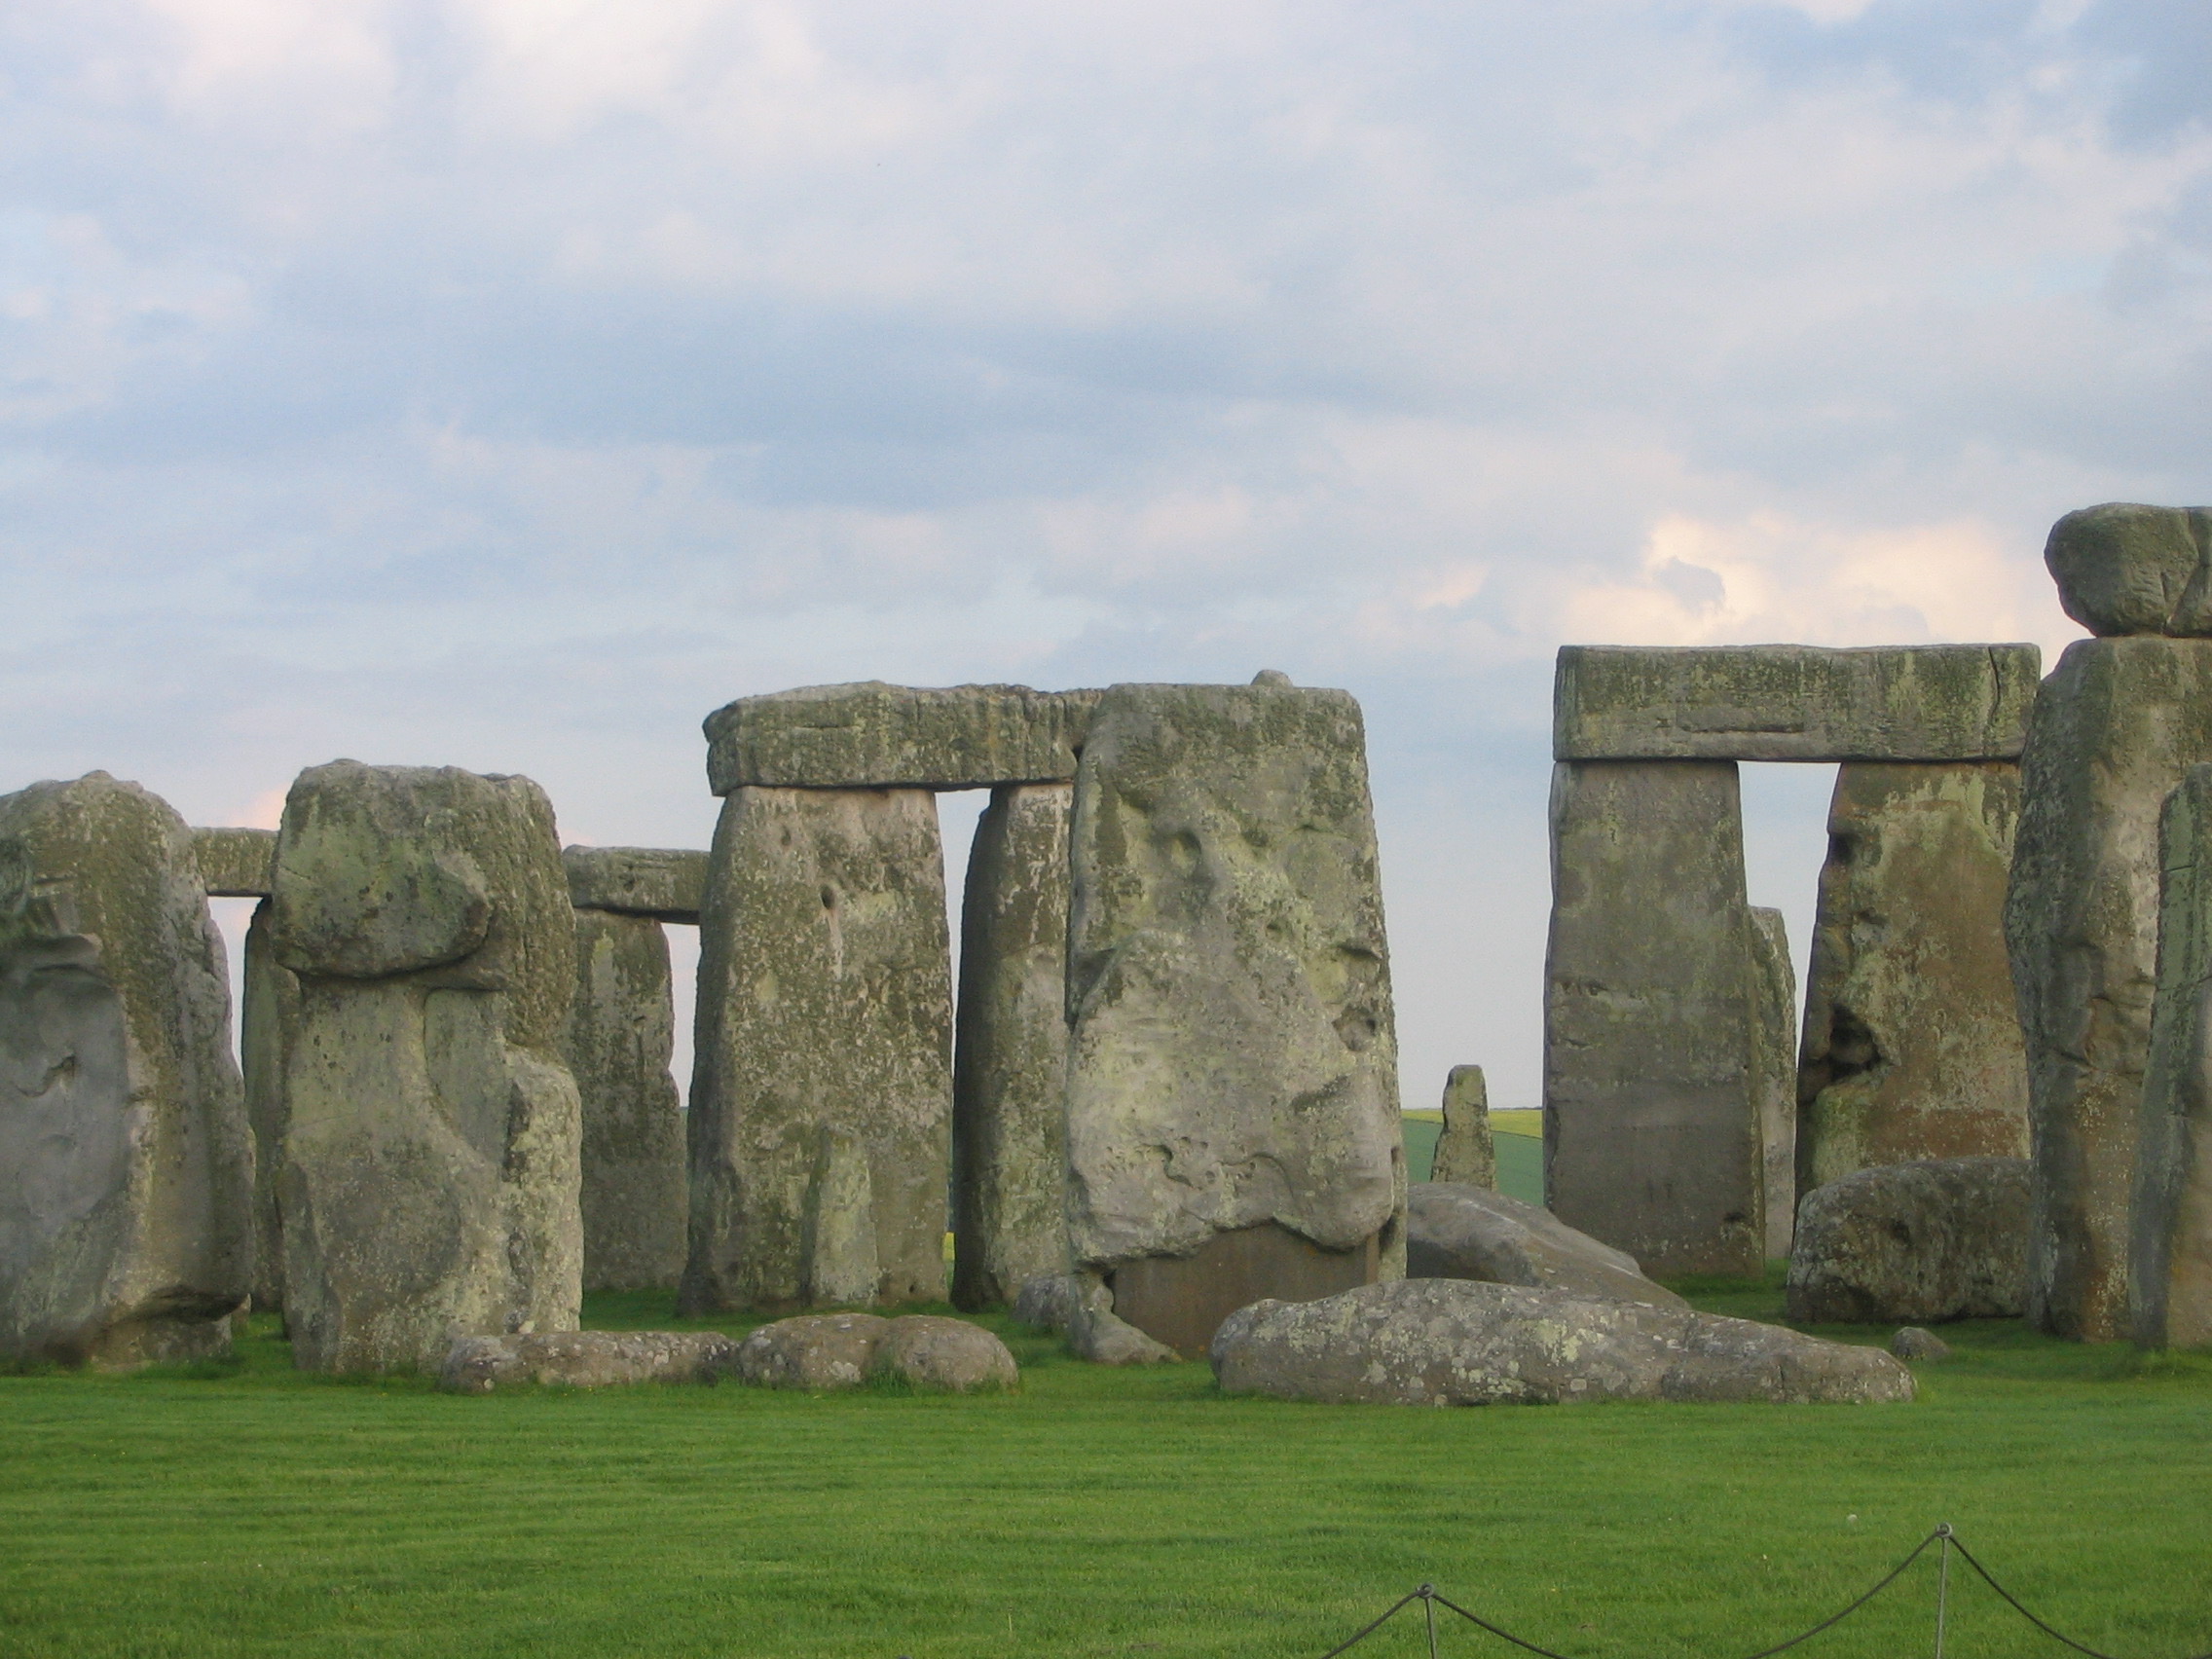 stone stonehenge in a grassy field with Stonehenge in the background